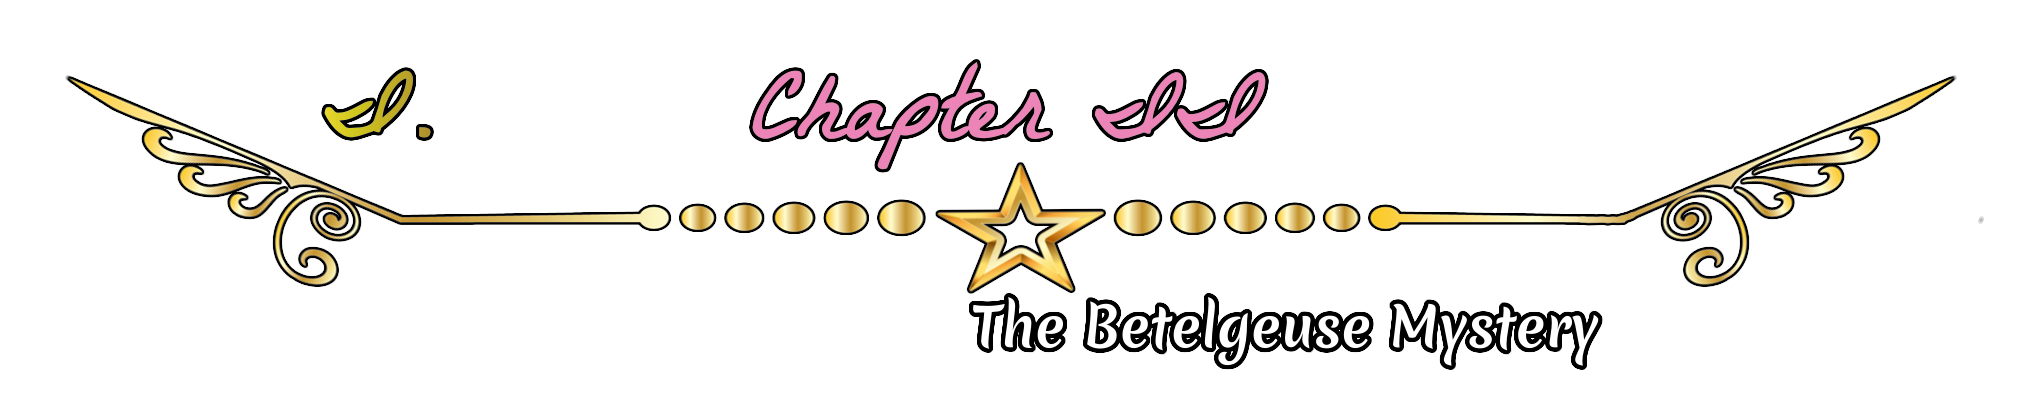 Arc 1 - Chapter 2 - The Betelgeuse Mystery